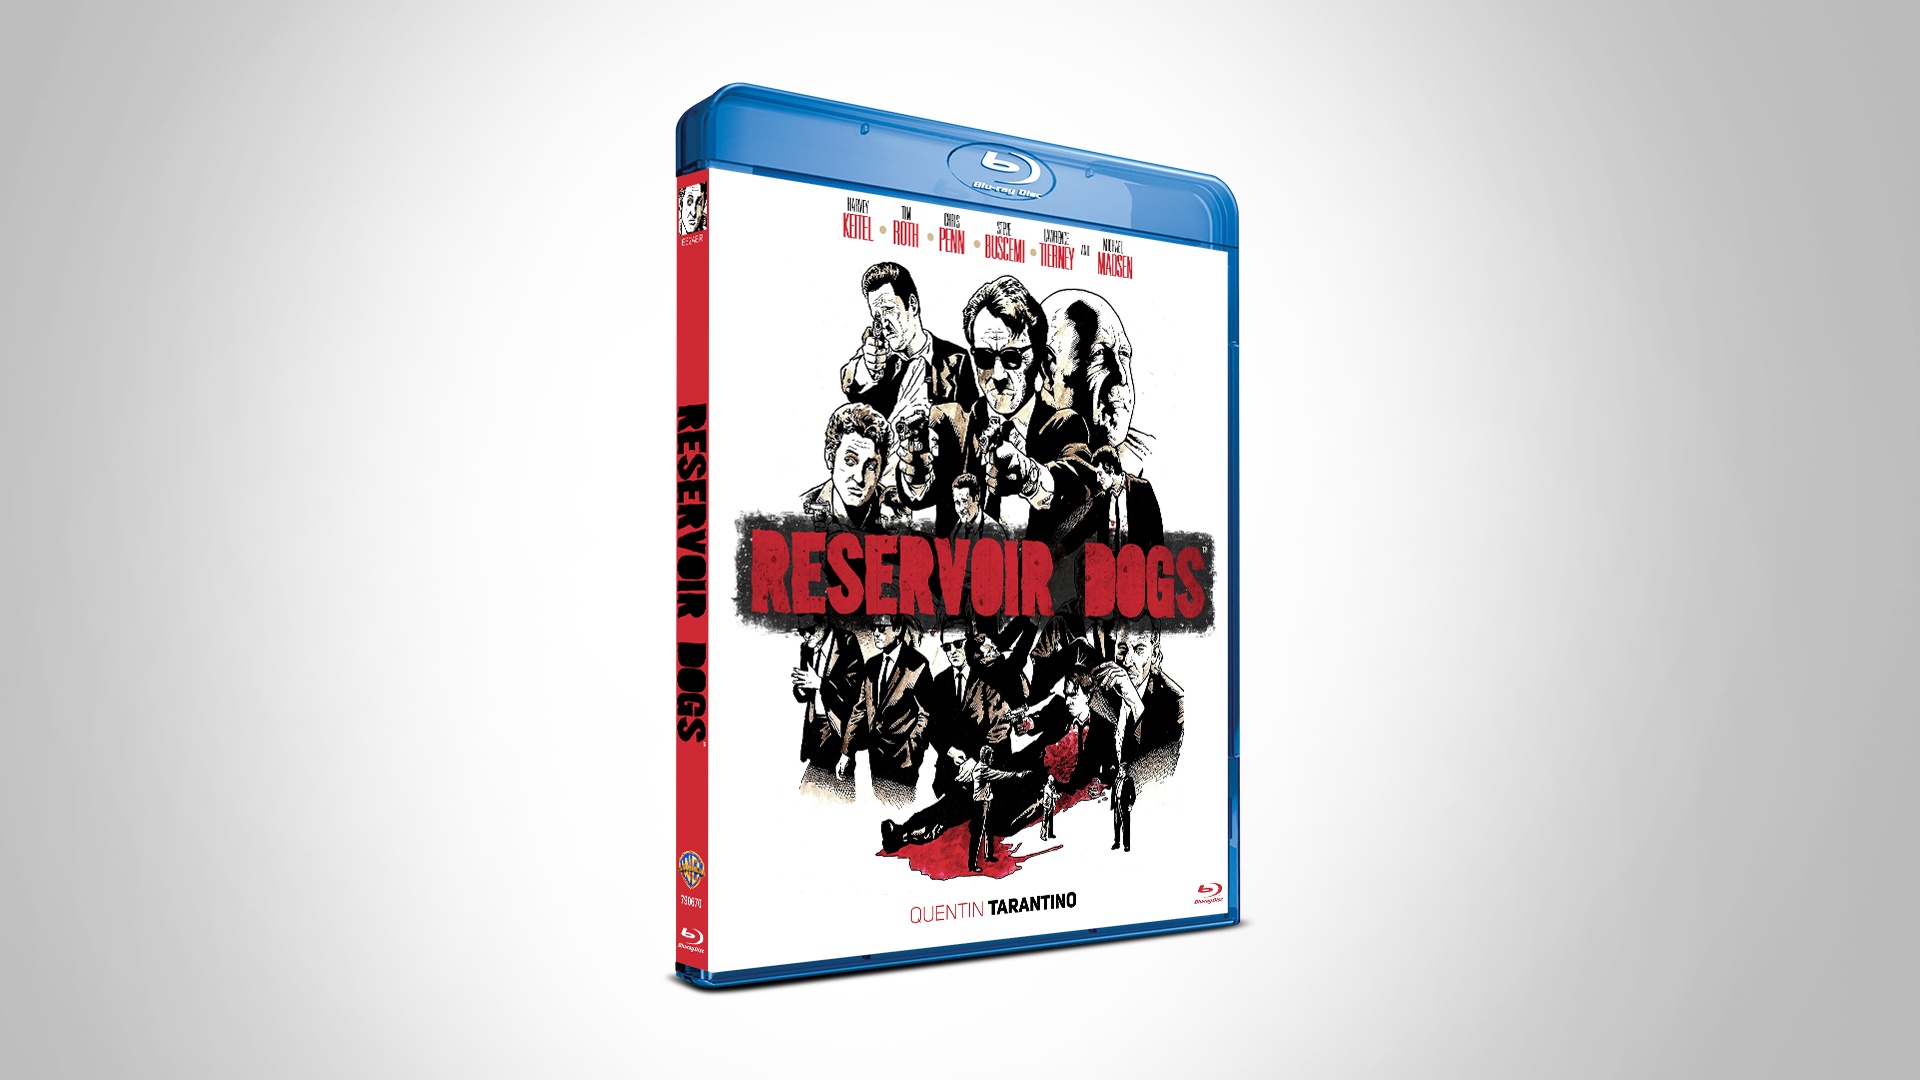 Viewing full size Reservoir Dogs box cover